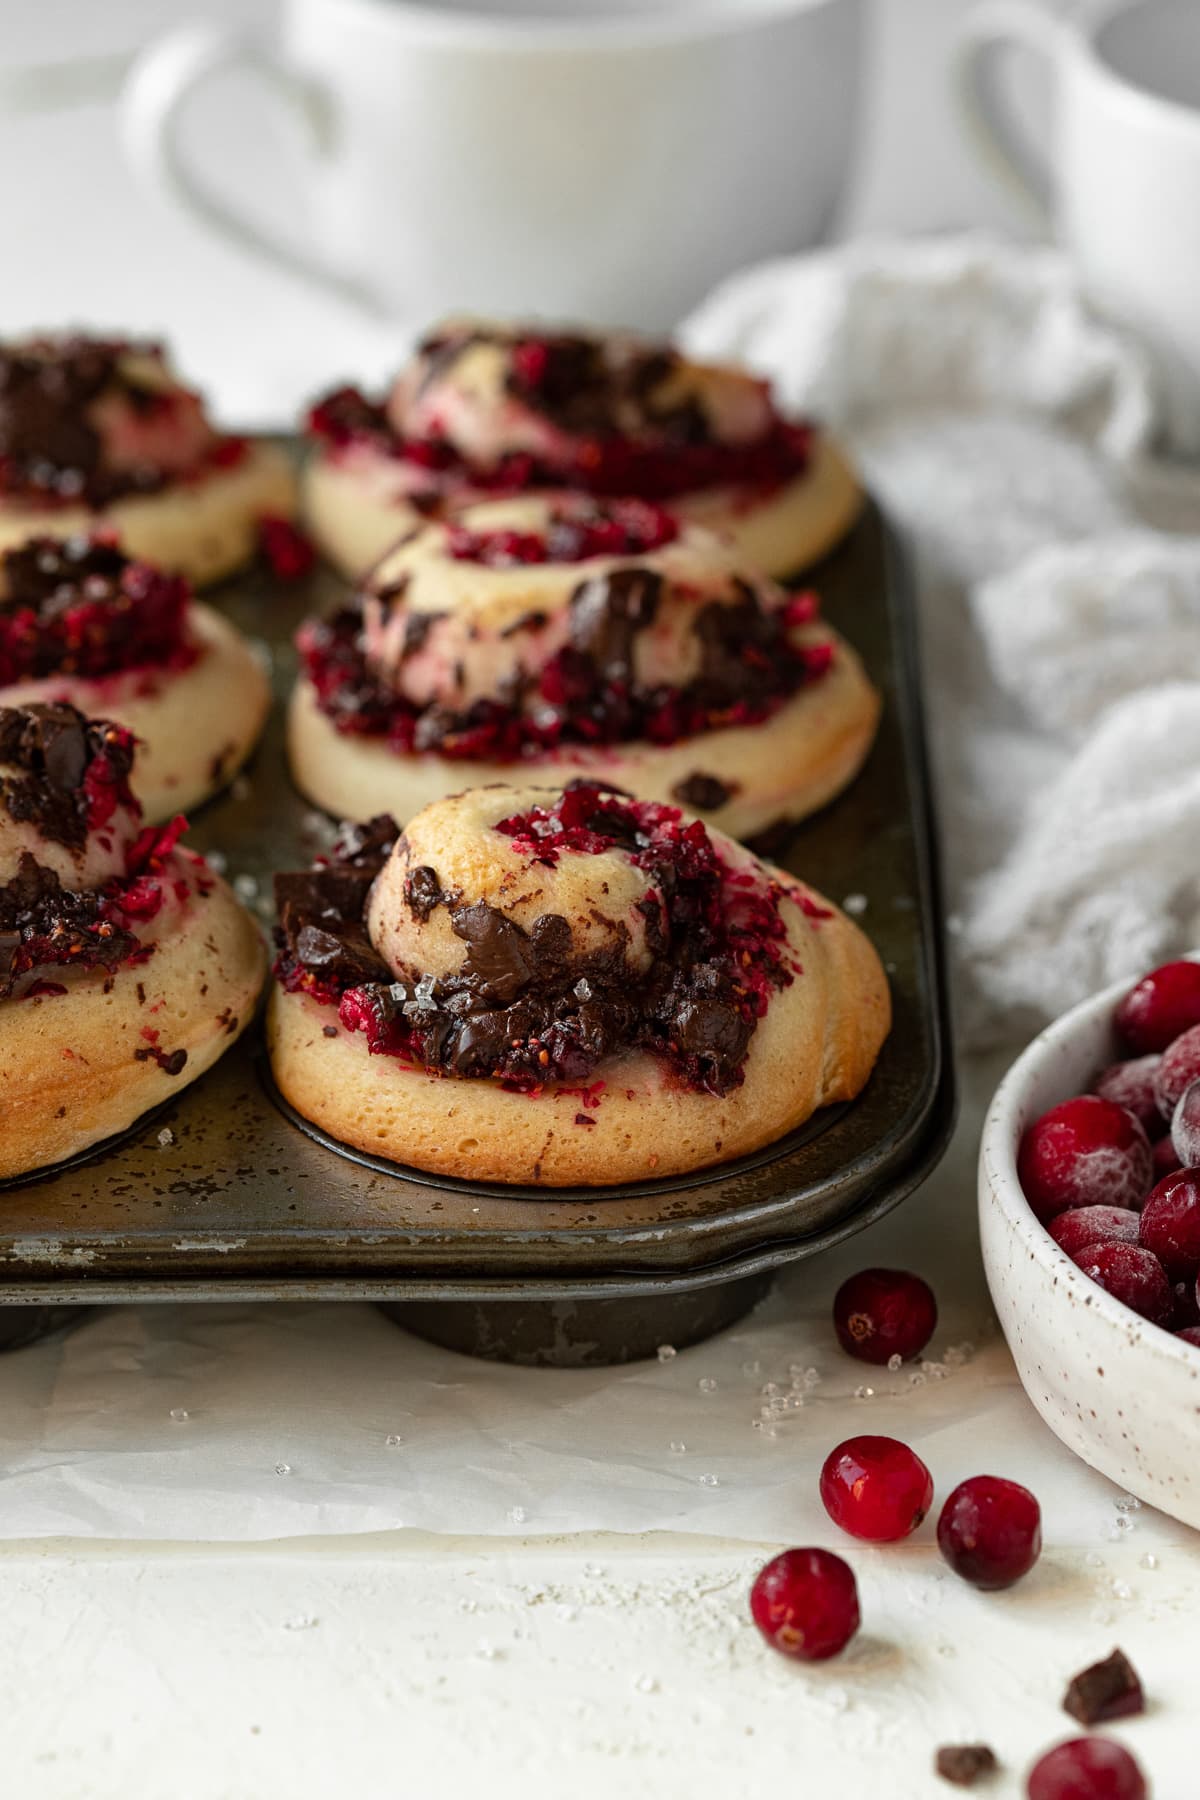 Sweet rolls filled with a cranberry-chocolate mixture, baked in a muffin pan.